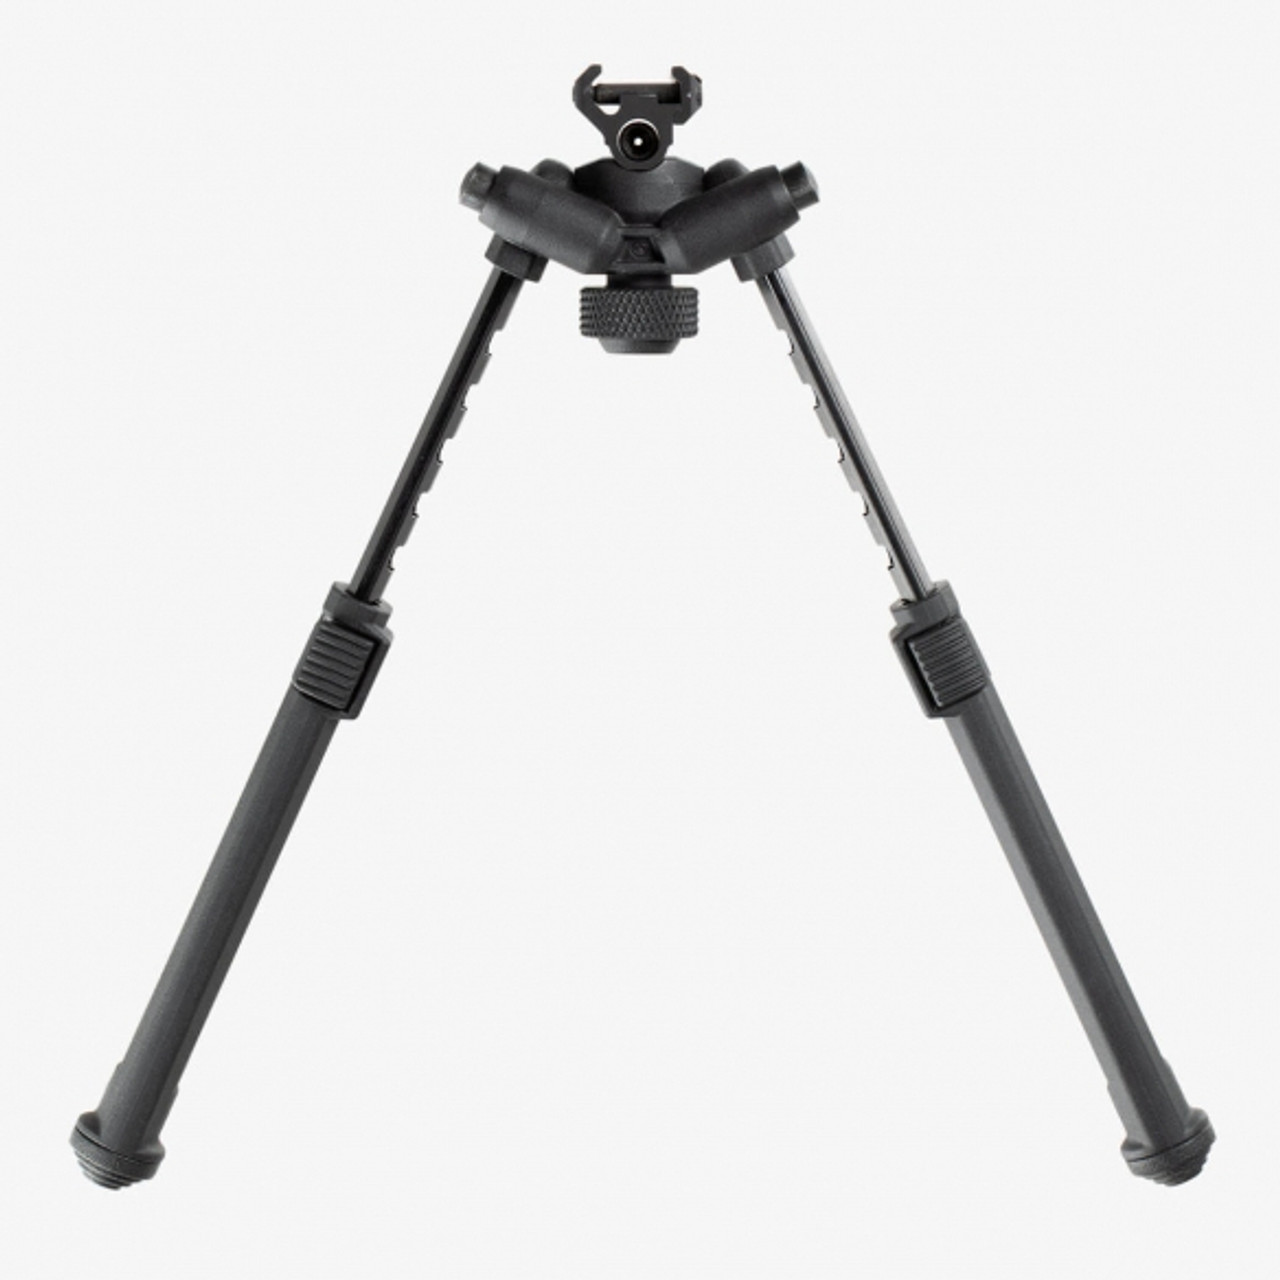 The Magpul Bipod for 1913 Picatinny Rail offers serious strength and versatility at a price that provides unmatched value. Our lightweight Mil-Spec hard anodized 6061 T-6 aluminum and injection-molded polymer bipod brings innovation in ergonomics, functionality, strength and value together. Its low-profile design conceals its internal mechanisms and hardware, smoothly brushing off snags and bumps. Optimized for rapid one-handed adjustments, the bipod quickly and quietly transitions between user configurations.

In the shooting position, it is easily loaded with stabilizing forward tension without fear of failure or warping. Its aluminum and stainless steel components, along with its injection-molded reinforced polymer, ensure years of dependable performance and reliability, all while shaving weight. It's extremely light weight, at just over 11 oz.

Leg extensions slide and lock securely with the push of a button on any of the seven half-inch spaced locking detents. The legs extend 3.5 inches, from 6.8” to 10.3”. An industry-exclusive 50° of total tilt and 40° of total pan are controlled by a glove-friendly knurled tool-less bipod locking knob located between the extended legs. It also has the exclusive ability to lock pan at 0° while maintaining full tilt functionality. Folded, the streamlined housing and legs fit neatly under the barrel and are just under 2.3” deep and 3.3” wide. Anodized surfaces and tight, precision tolerances mitigate squeaks and rattles.

A soft rubber bipod locking knob cap is attached to the locking knob gives users a steady, non-marring forward rest while the bipod is folded. Additionally, its staggered soft rubber feet hold fast on a variety of shooting surfaces and are easily removed with a roll pin punch. Should users choose to change feet, the Magpul Bipod’s legs accept most Atlas pattern bipod replaceable feet, except for the Atlas 5-H style.

Made in the U.S.A.